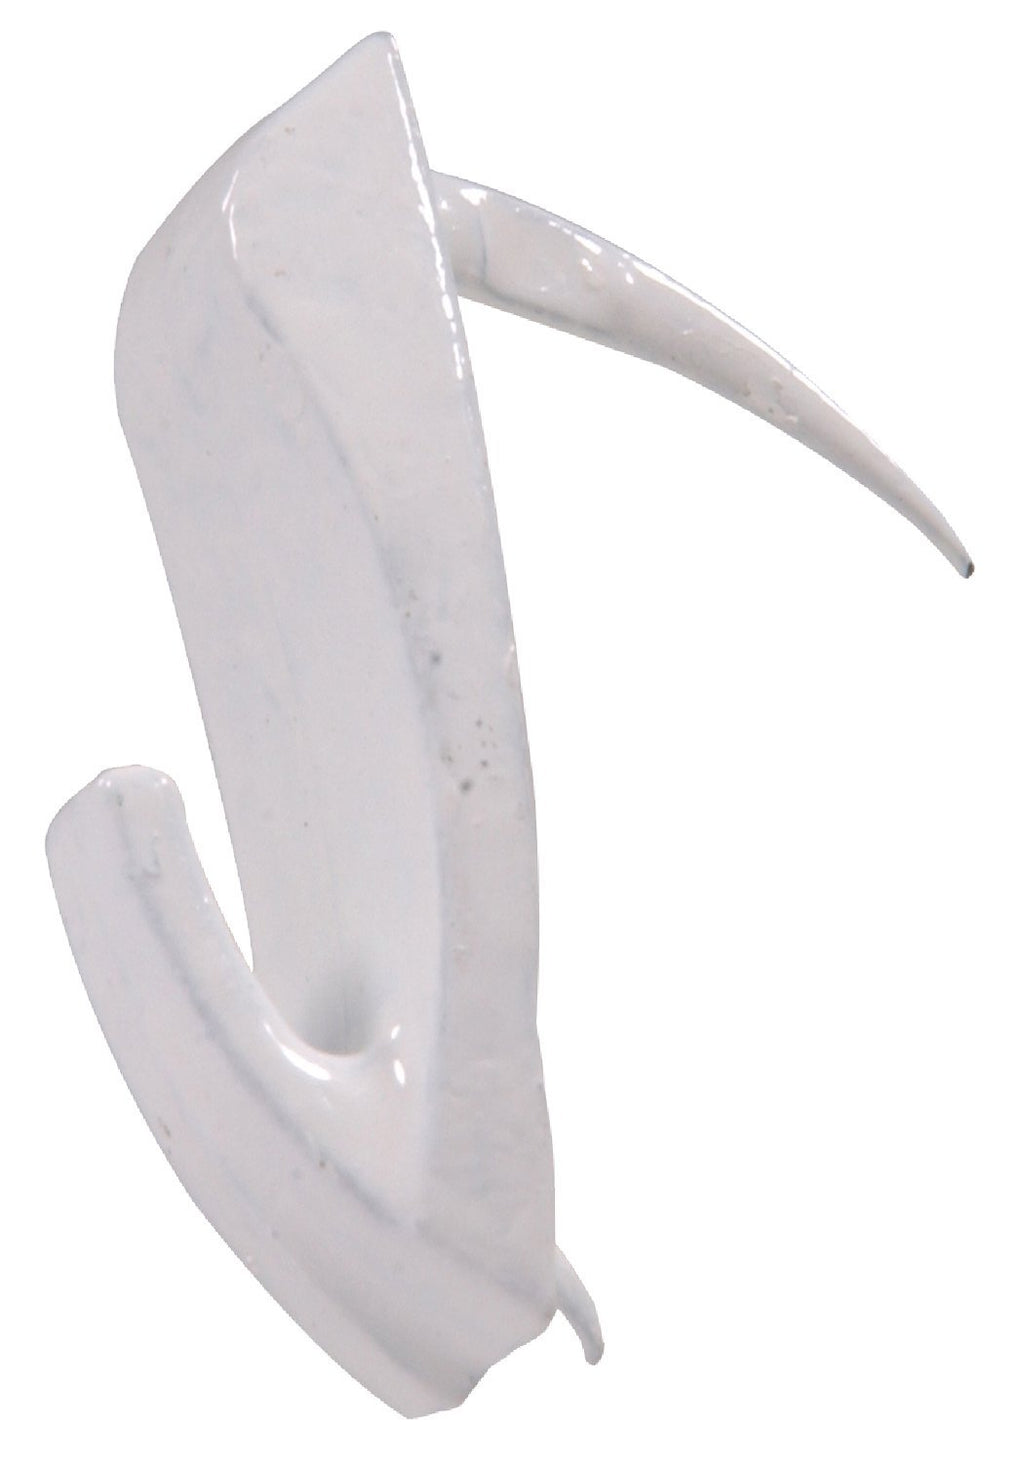 NewNest Australia - Hillman 122398 Large Wall Biter Picture Hangers White Finish 60lbs Package of 3 